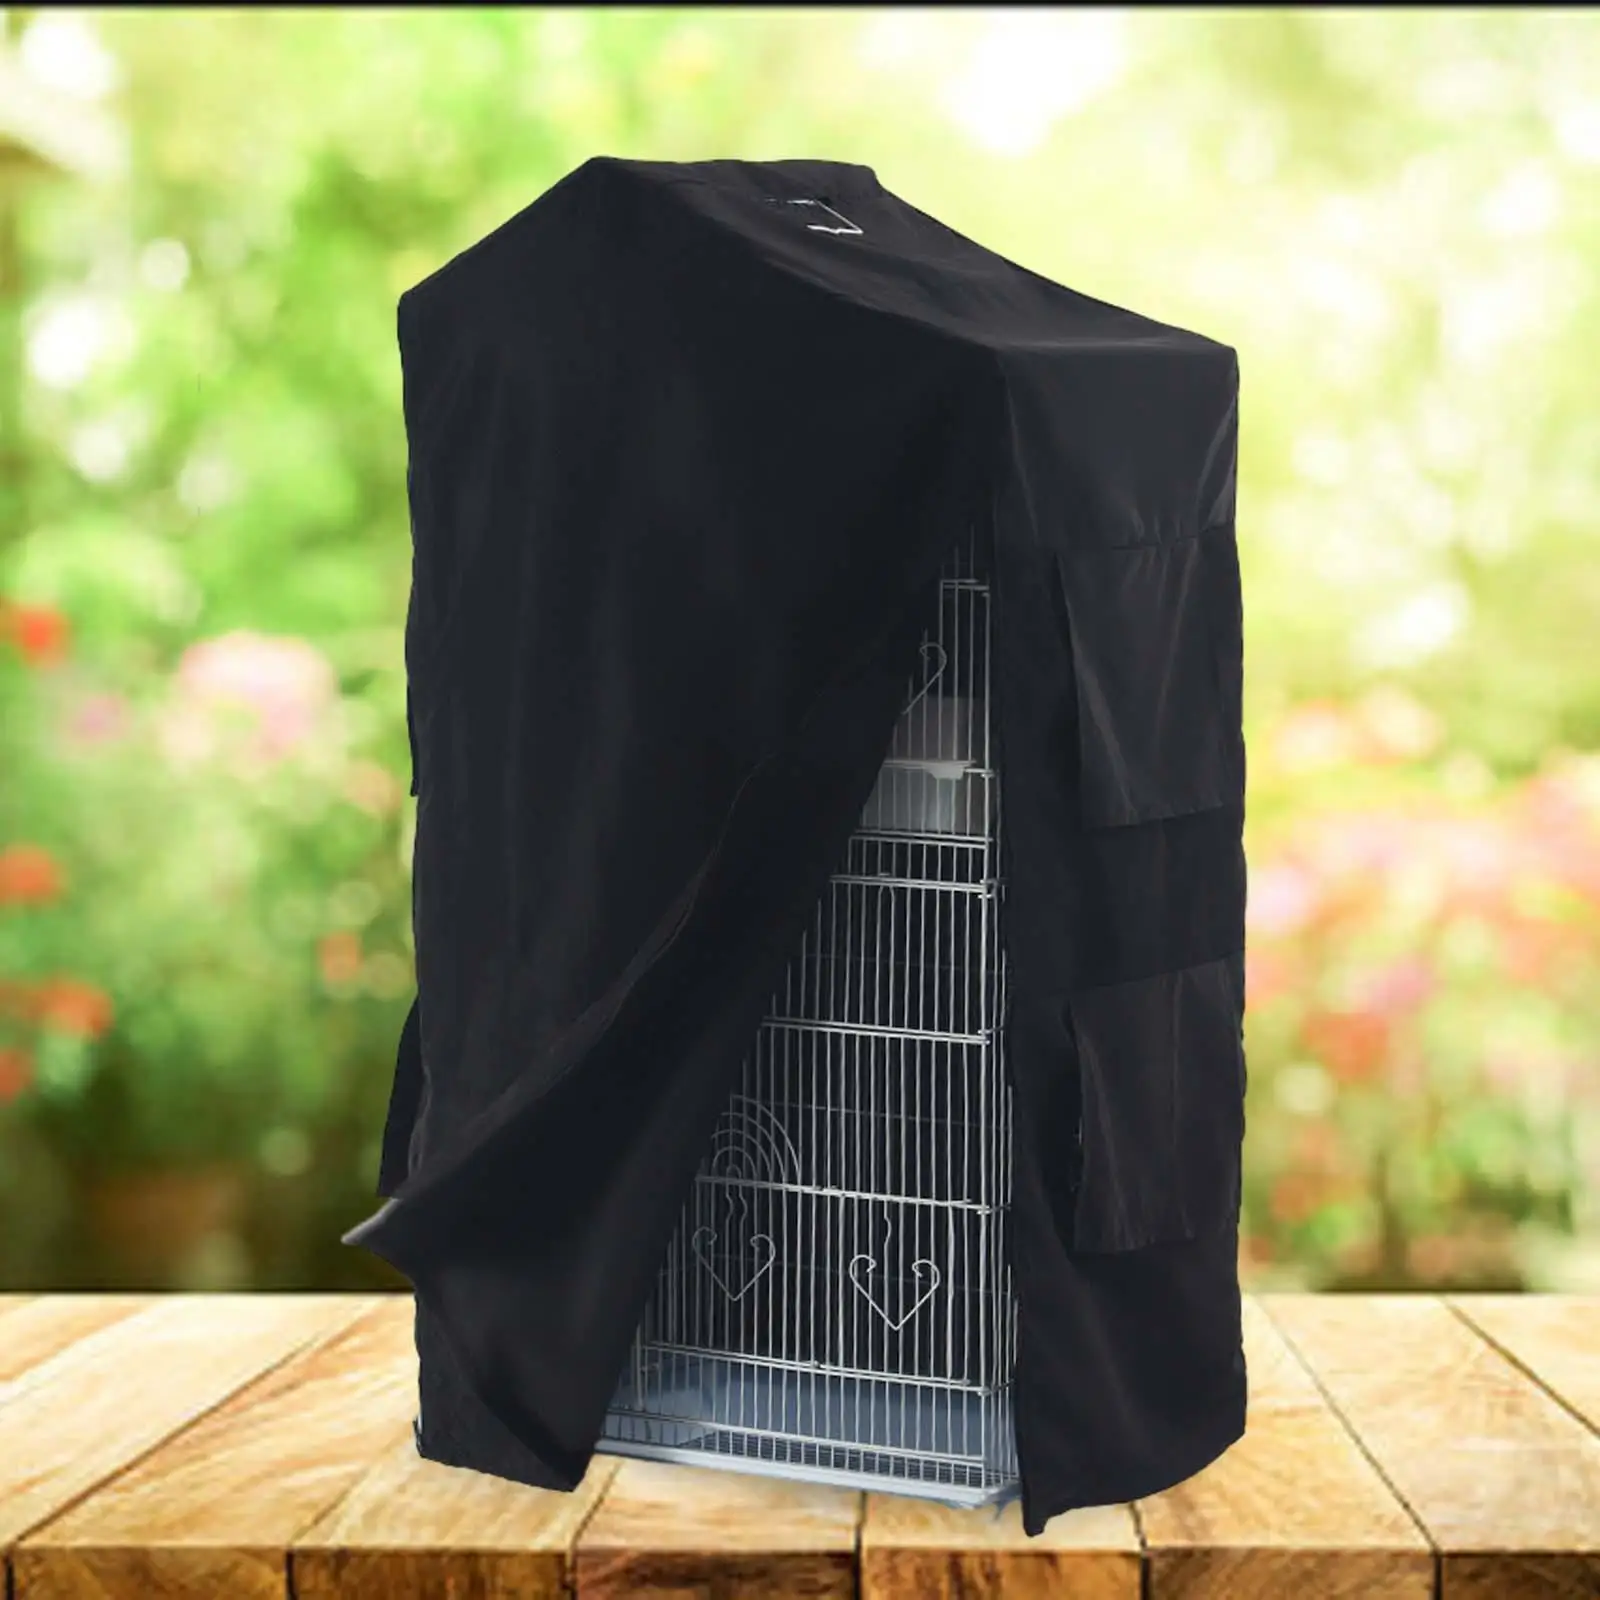 Bird Cage Cover Breathable Sunproof Shade Cloth Animal Privacy Dustproof for Parakeets Budgies Parrot Accessories